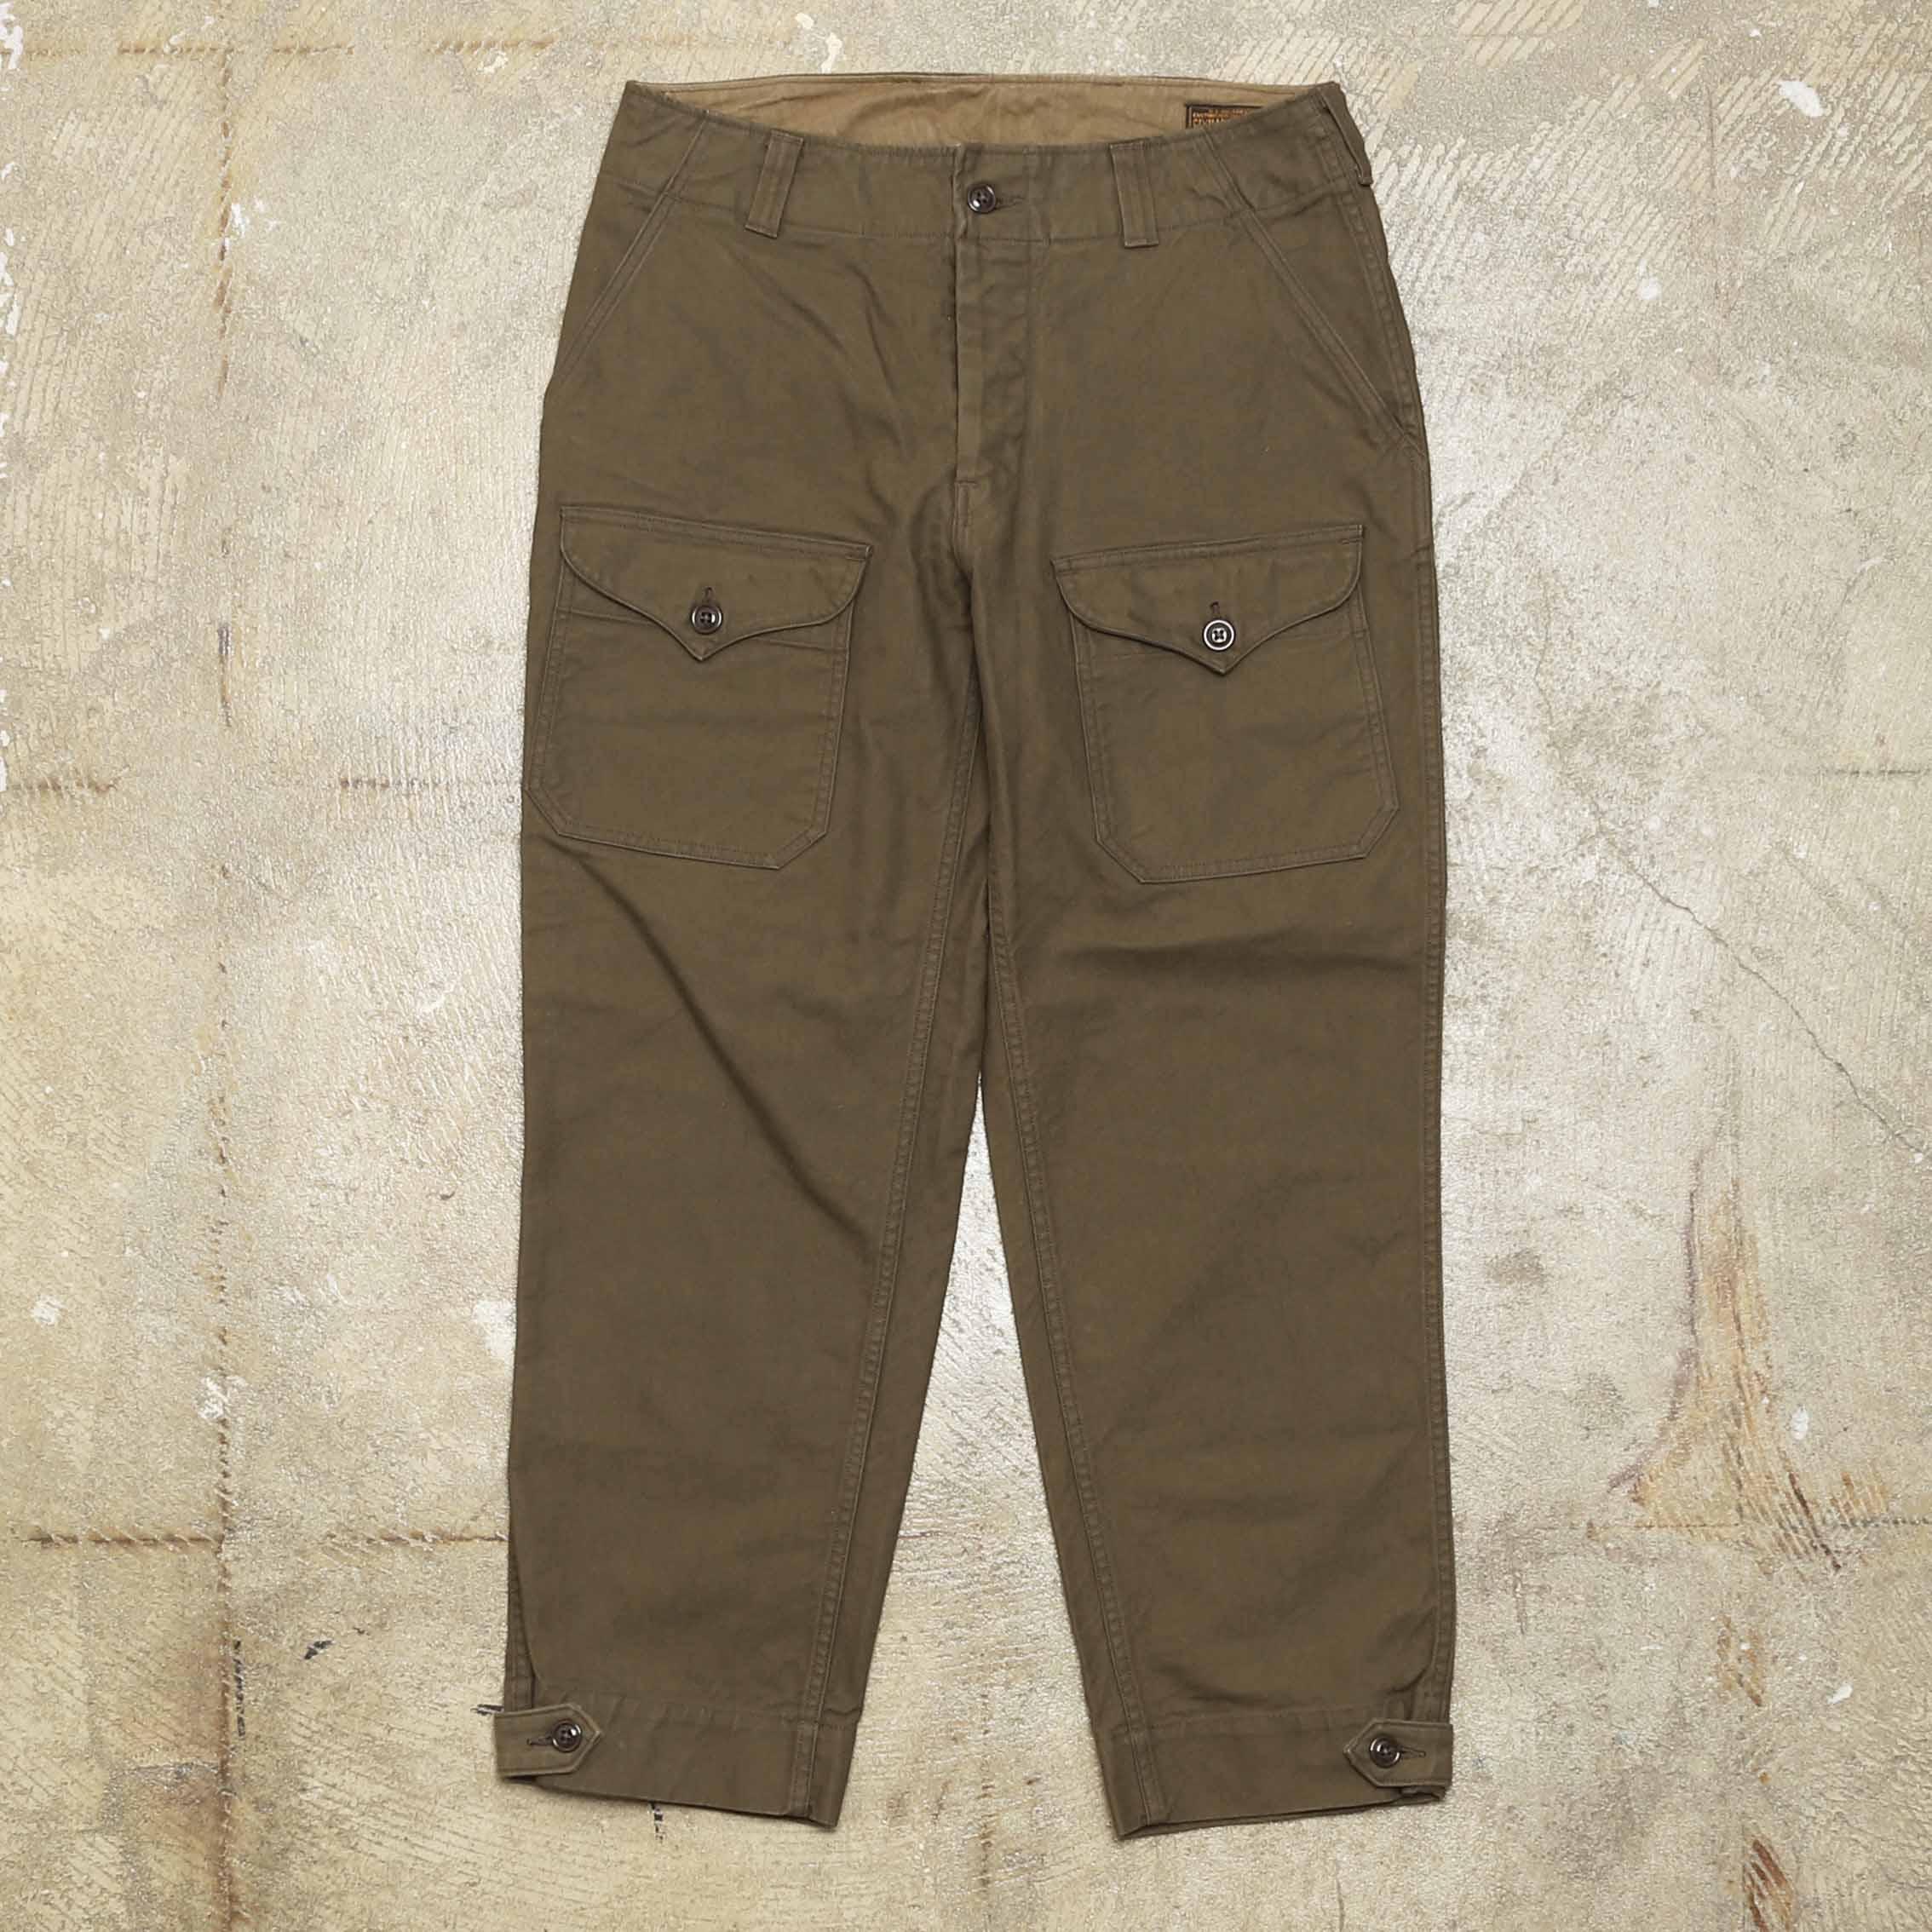 FREEWHEELERS UNION SPECIAL OVERALLS CIVILIAN CREW MILITARY PANTS - OLIVE